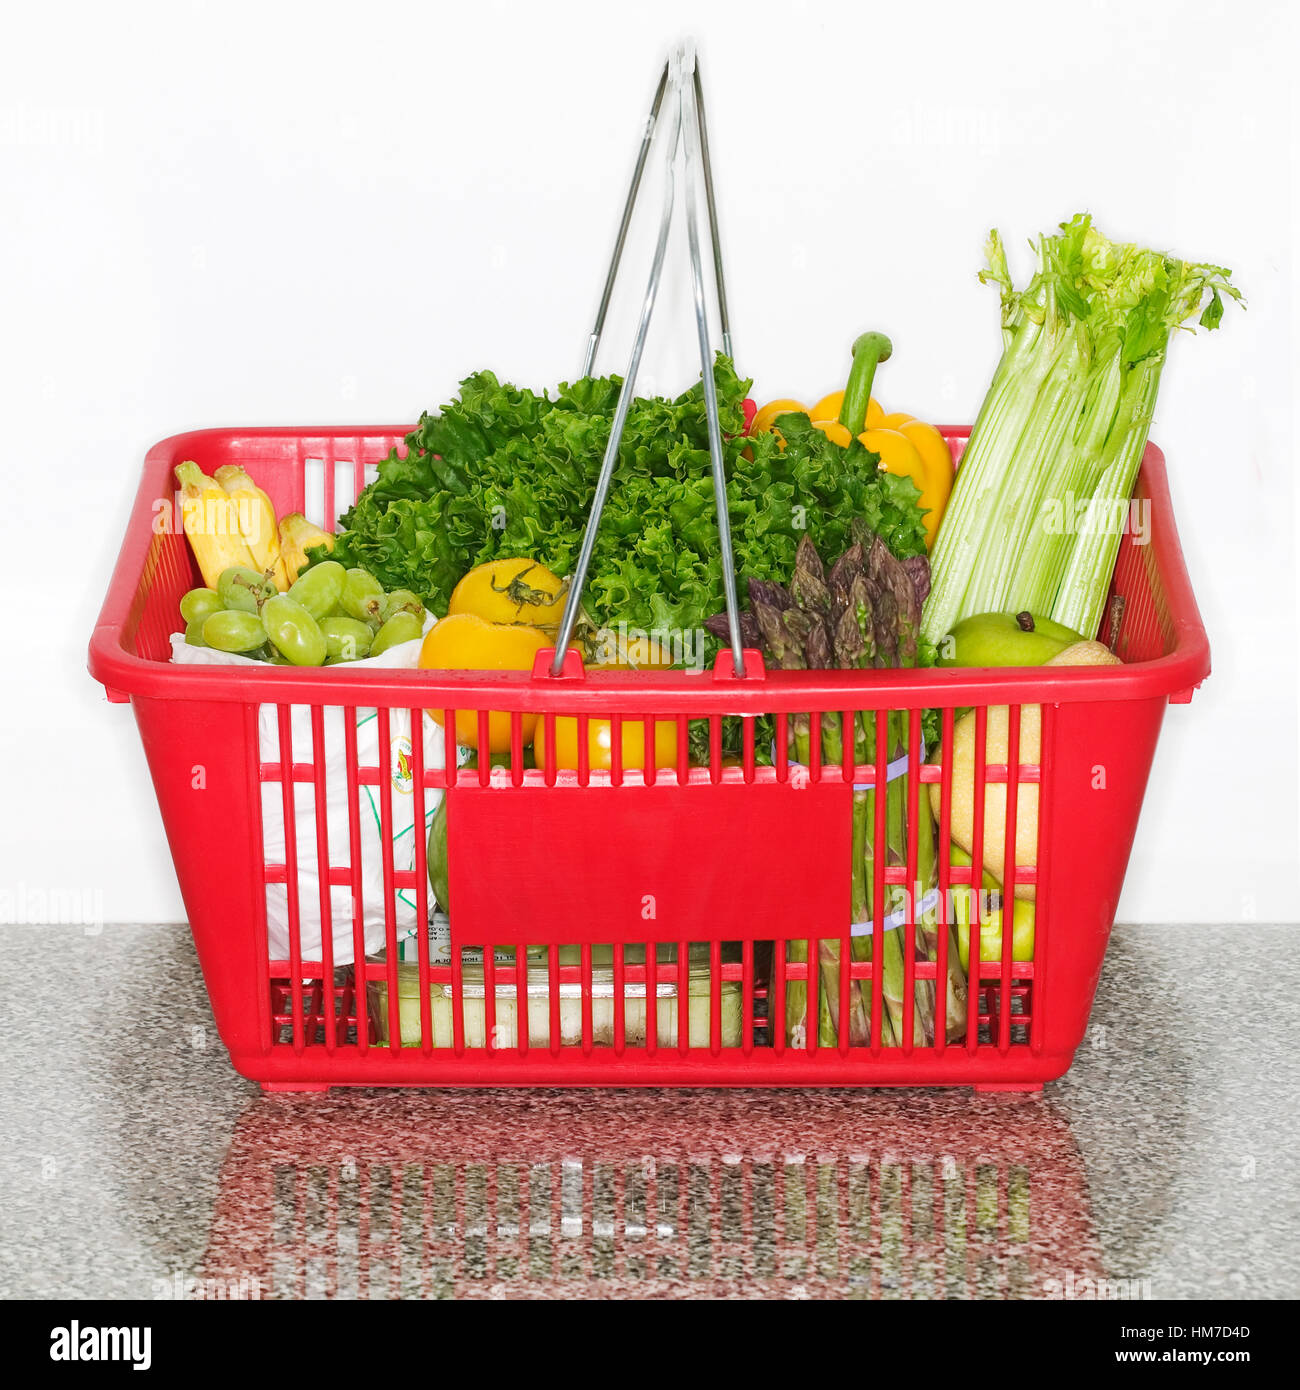 Fruits and vegetables in grocery basket on countertop Stock Photo